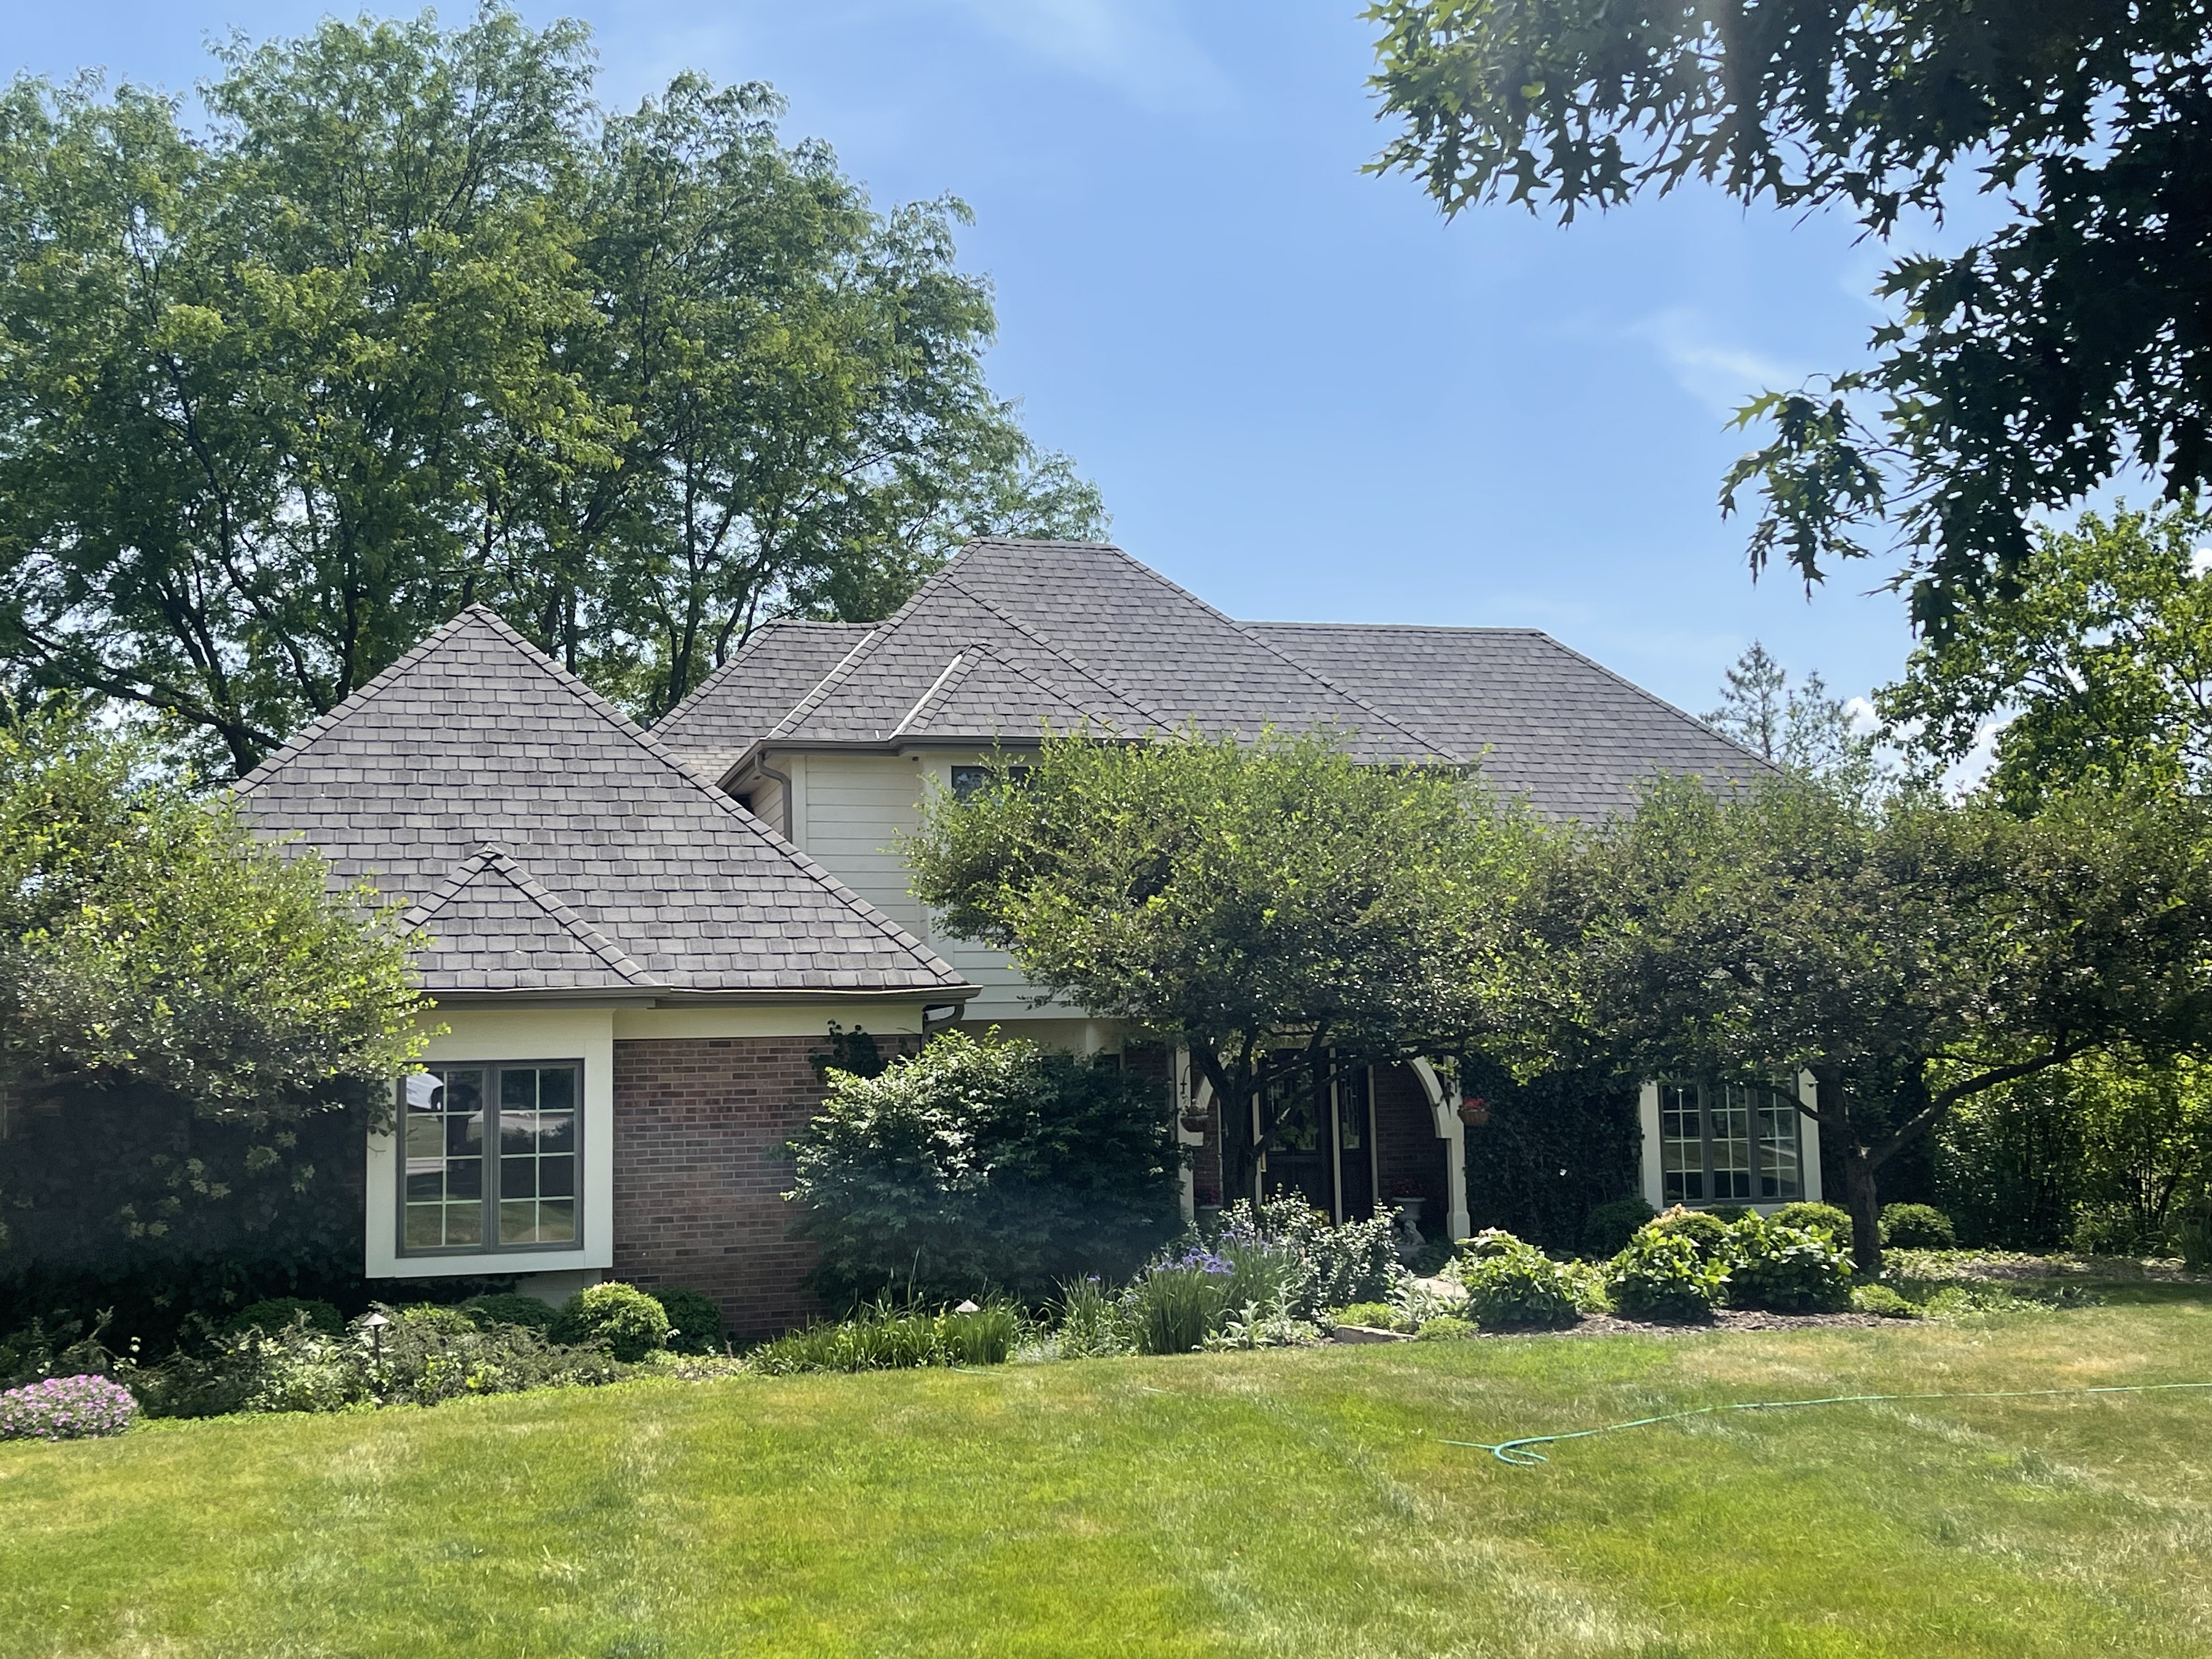 CertainTeed Belmont Roof installed in St. Charles, Illinois